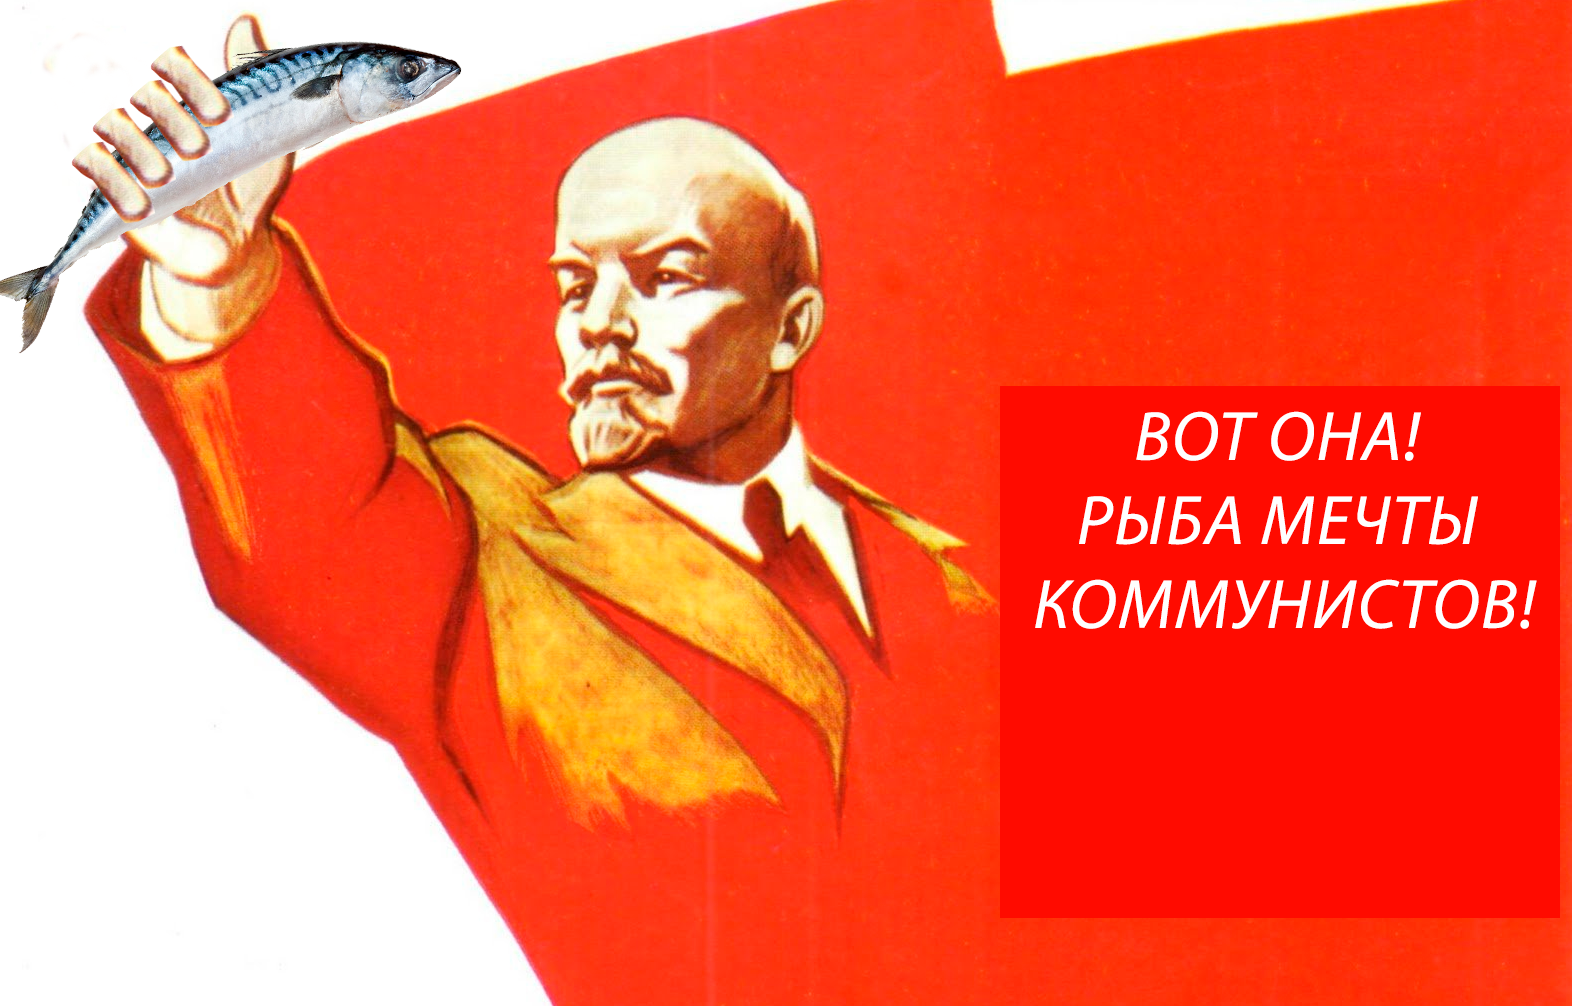 Communists of Russia agitate for mackerel. - Politics, Elections, Communists, Mackerel, Longpost, Ilyich, The photo, Picture with text, Lenin